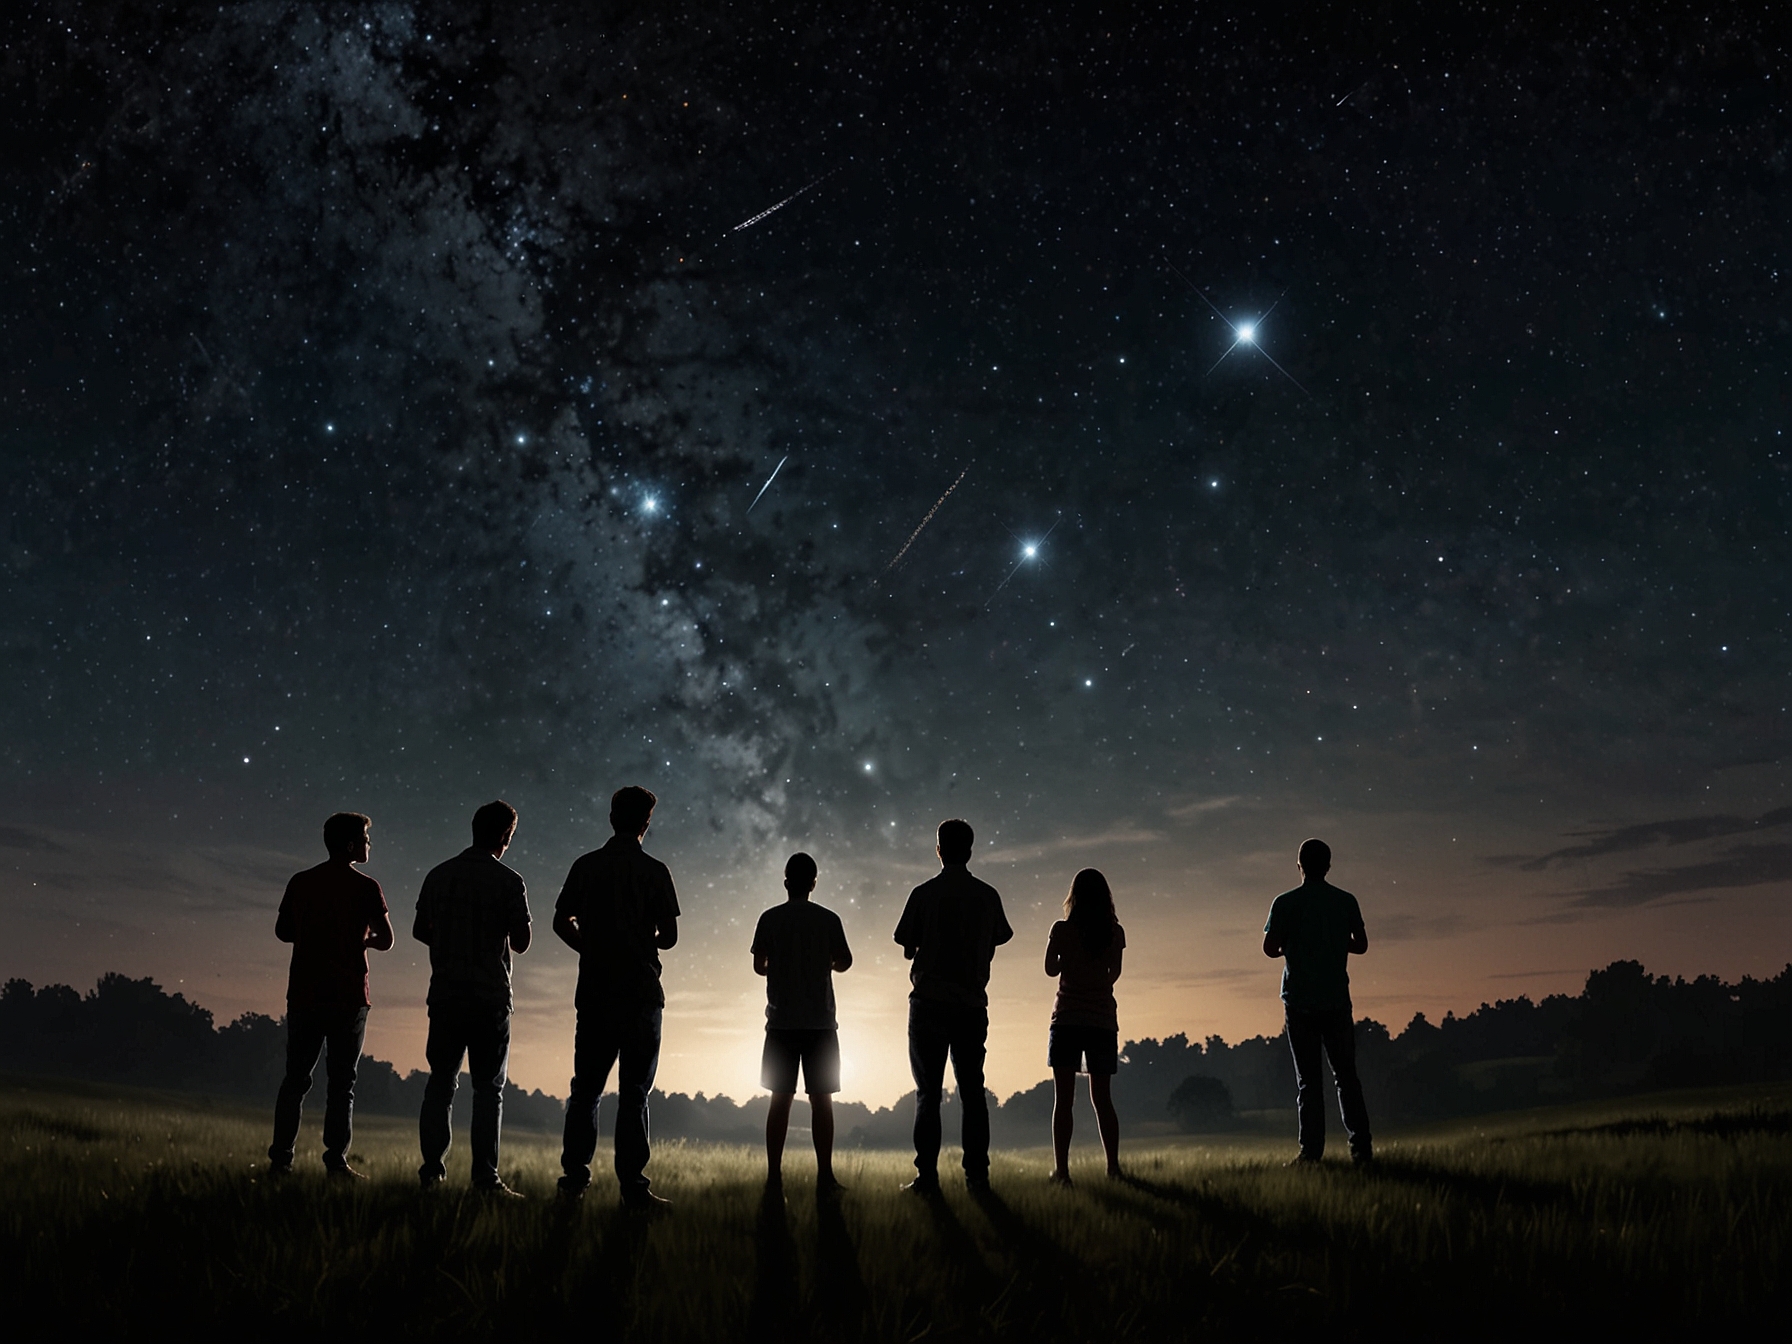 A group of stargazers in a rural area with minimal light pollution, using a stargazing app to locate and observe the spectacular nova explosion brightening the summer night sky.